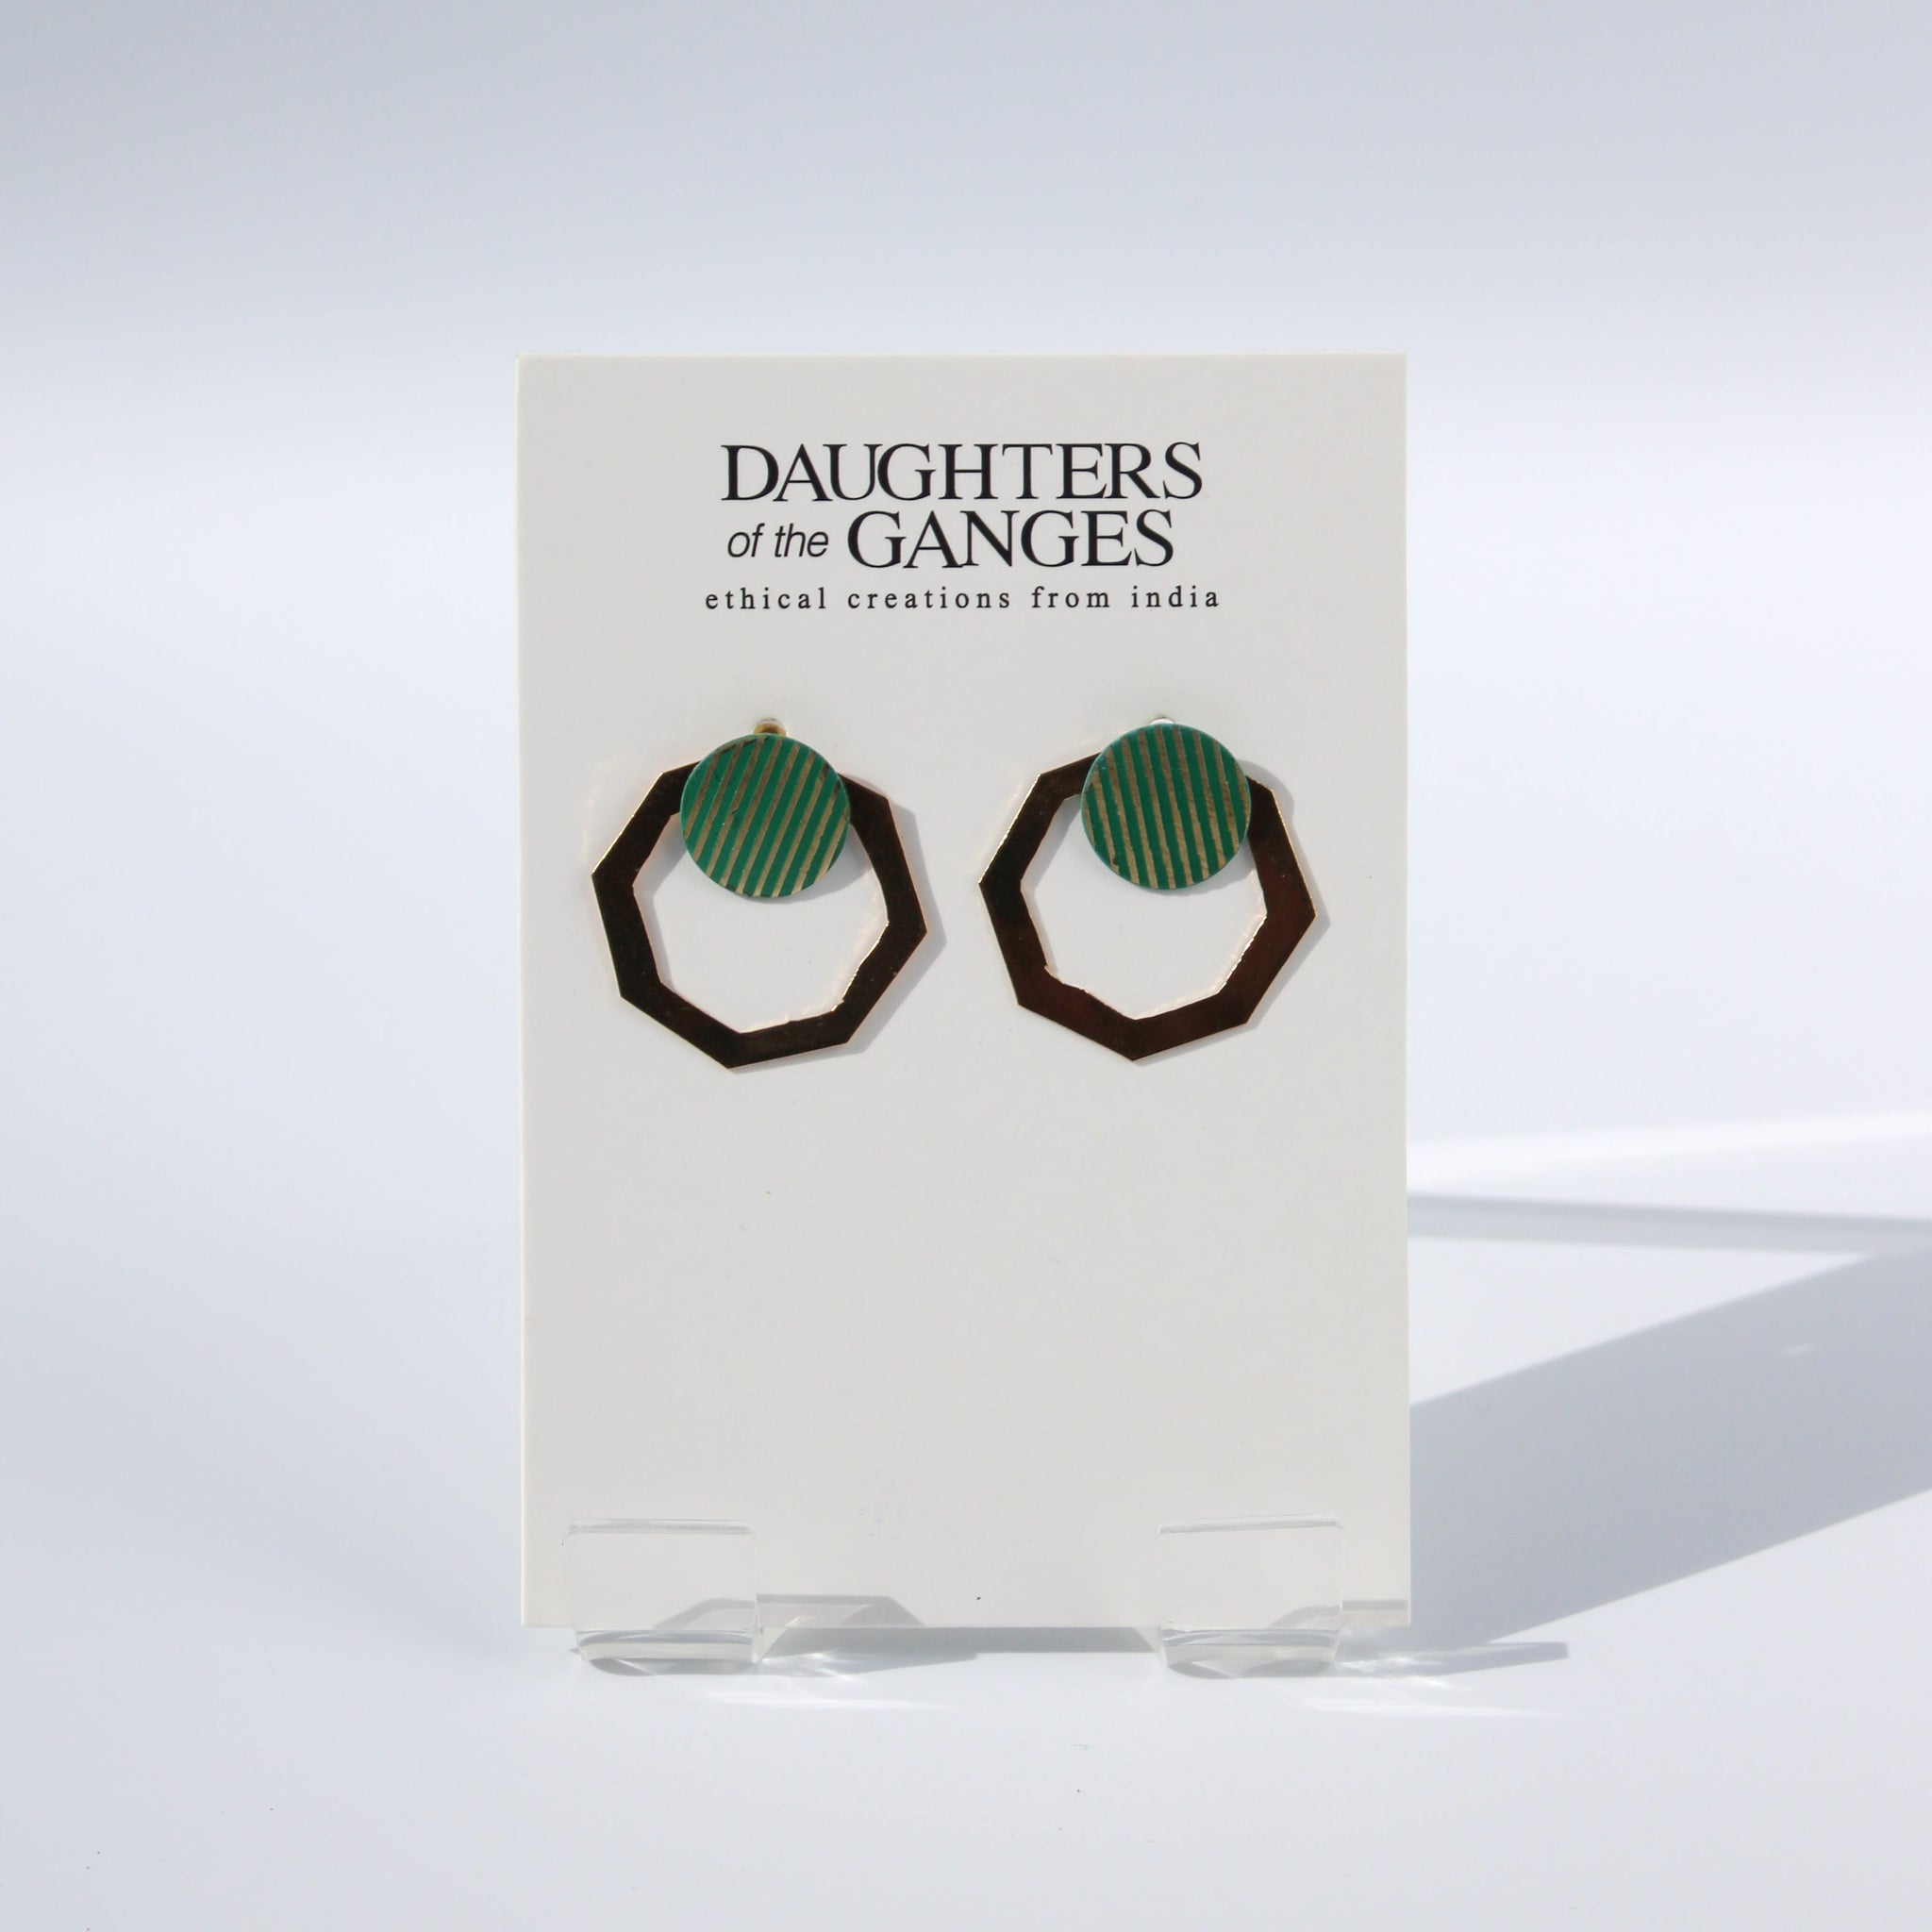 A pair of hexagonal brass earrings with a round disc at the fastening. The disc has copper green vertical lines over the brass.